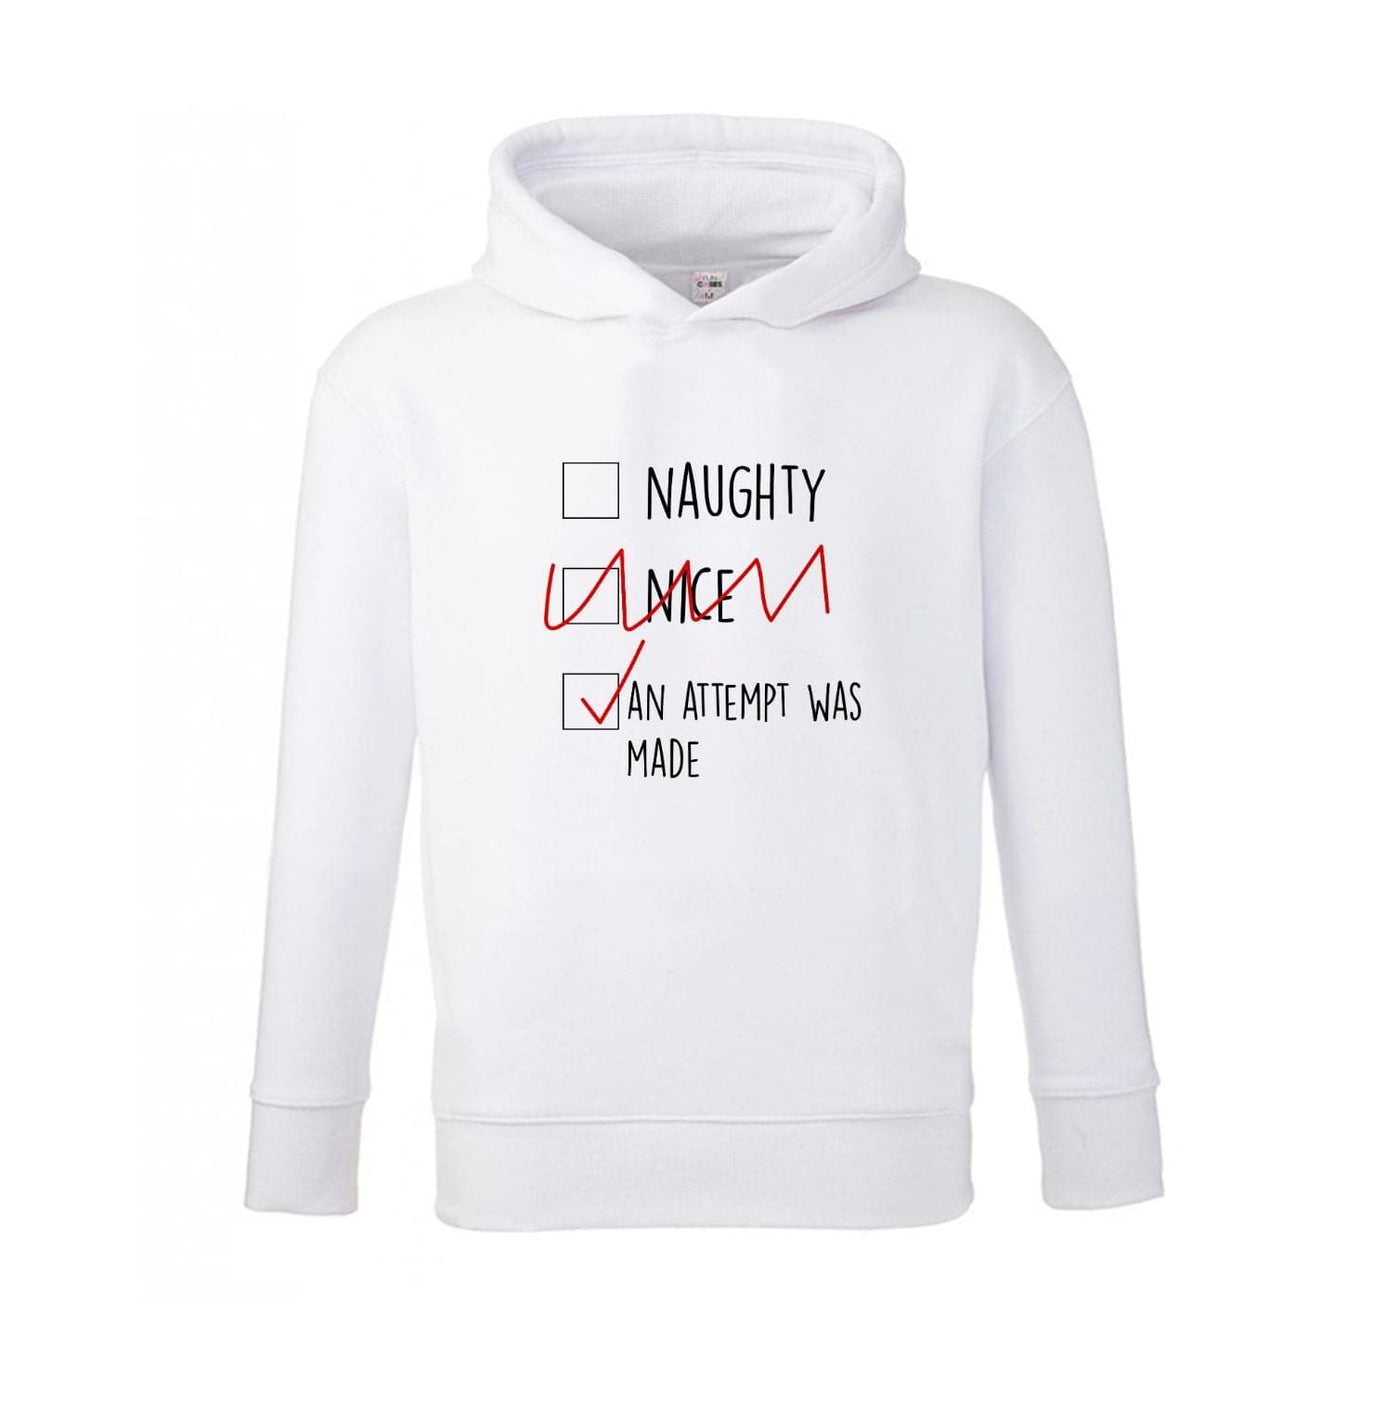 An Attempt Was Made - Naughty Or Nice  Kids Hoodie